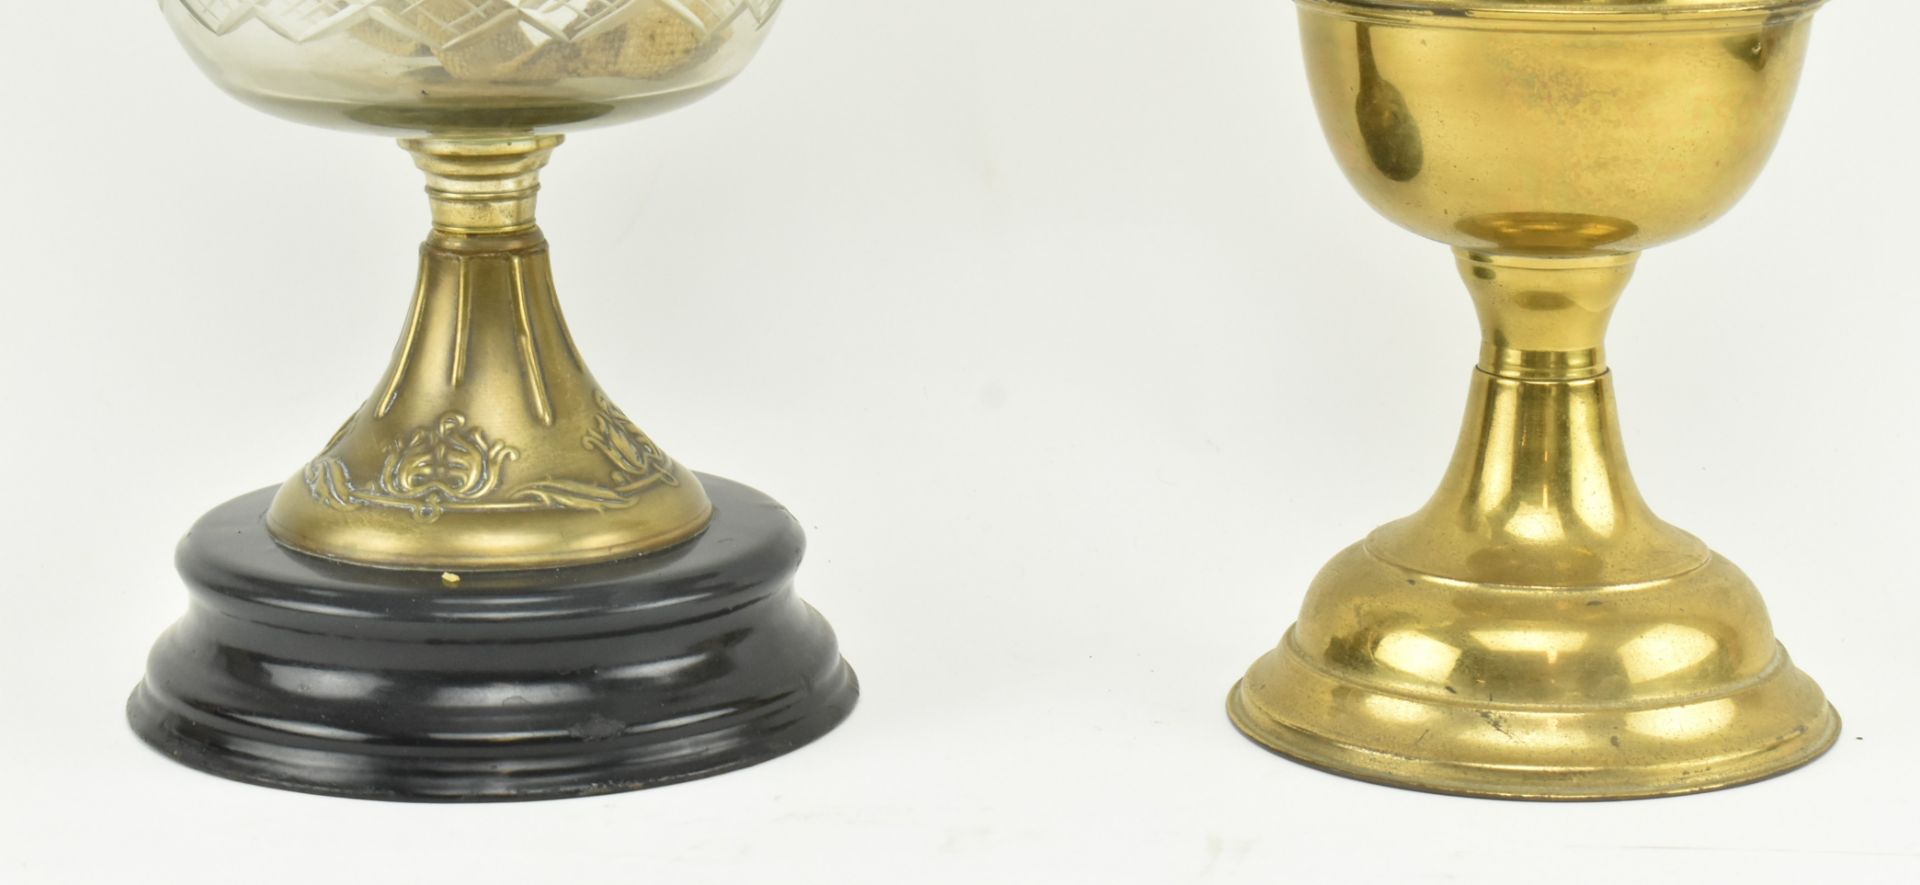 TWO VINTAGE 20TH CENTURY DUPLEX OIL LAMPS - Image 4 of 7